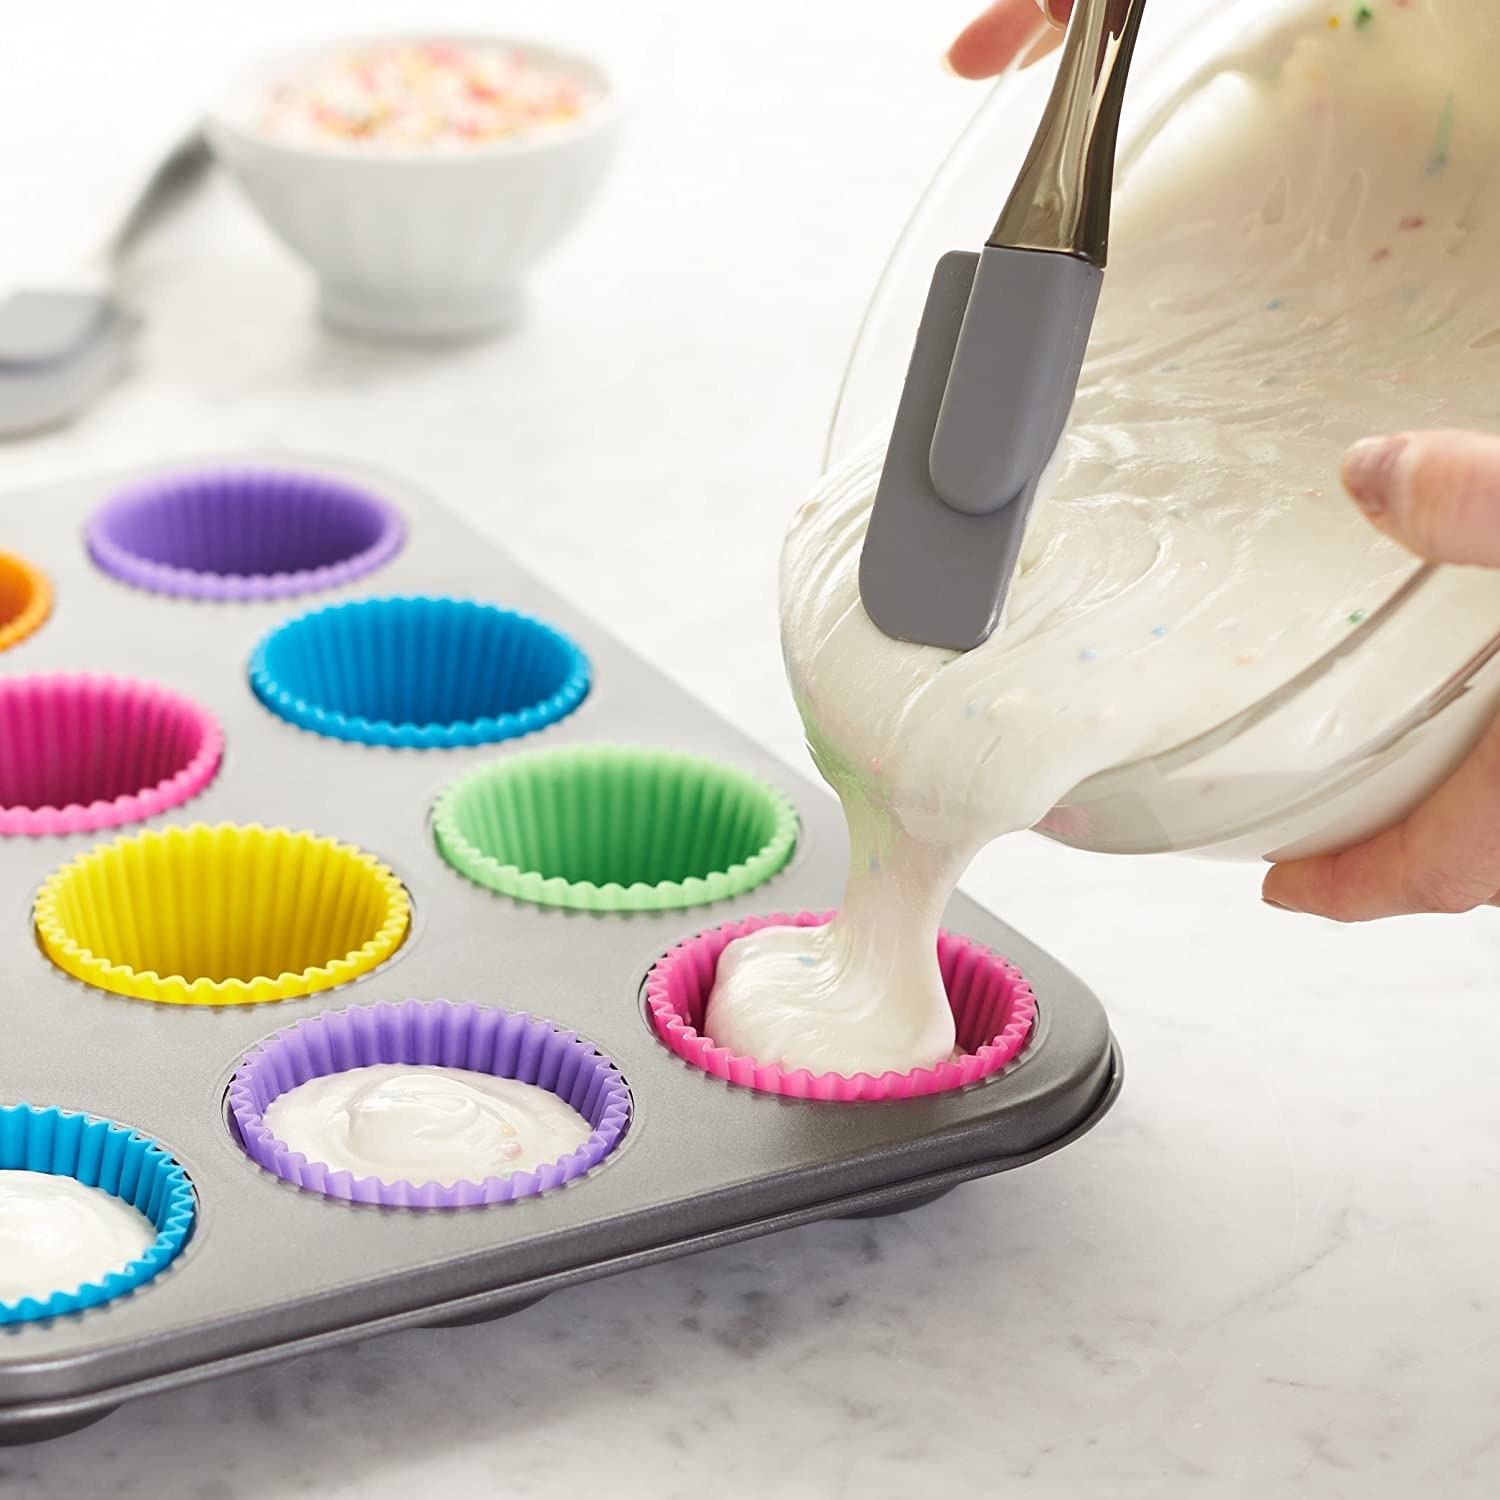 A person pouring batter into the silicone cups